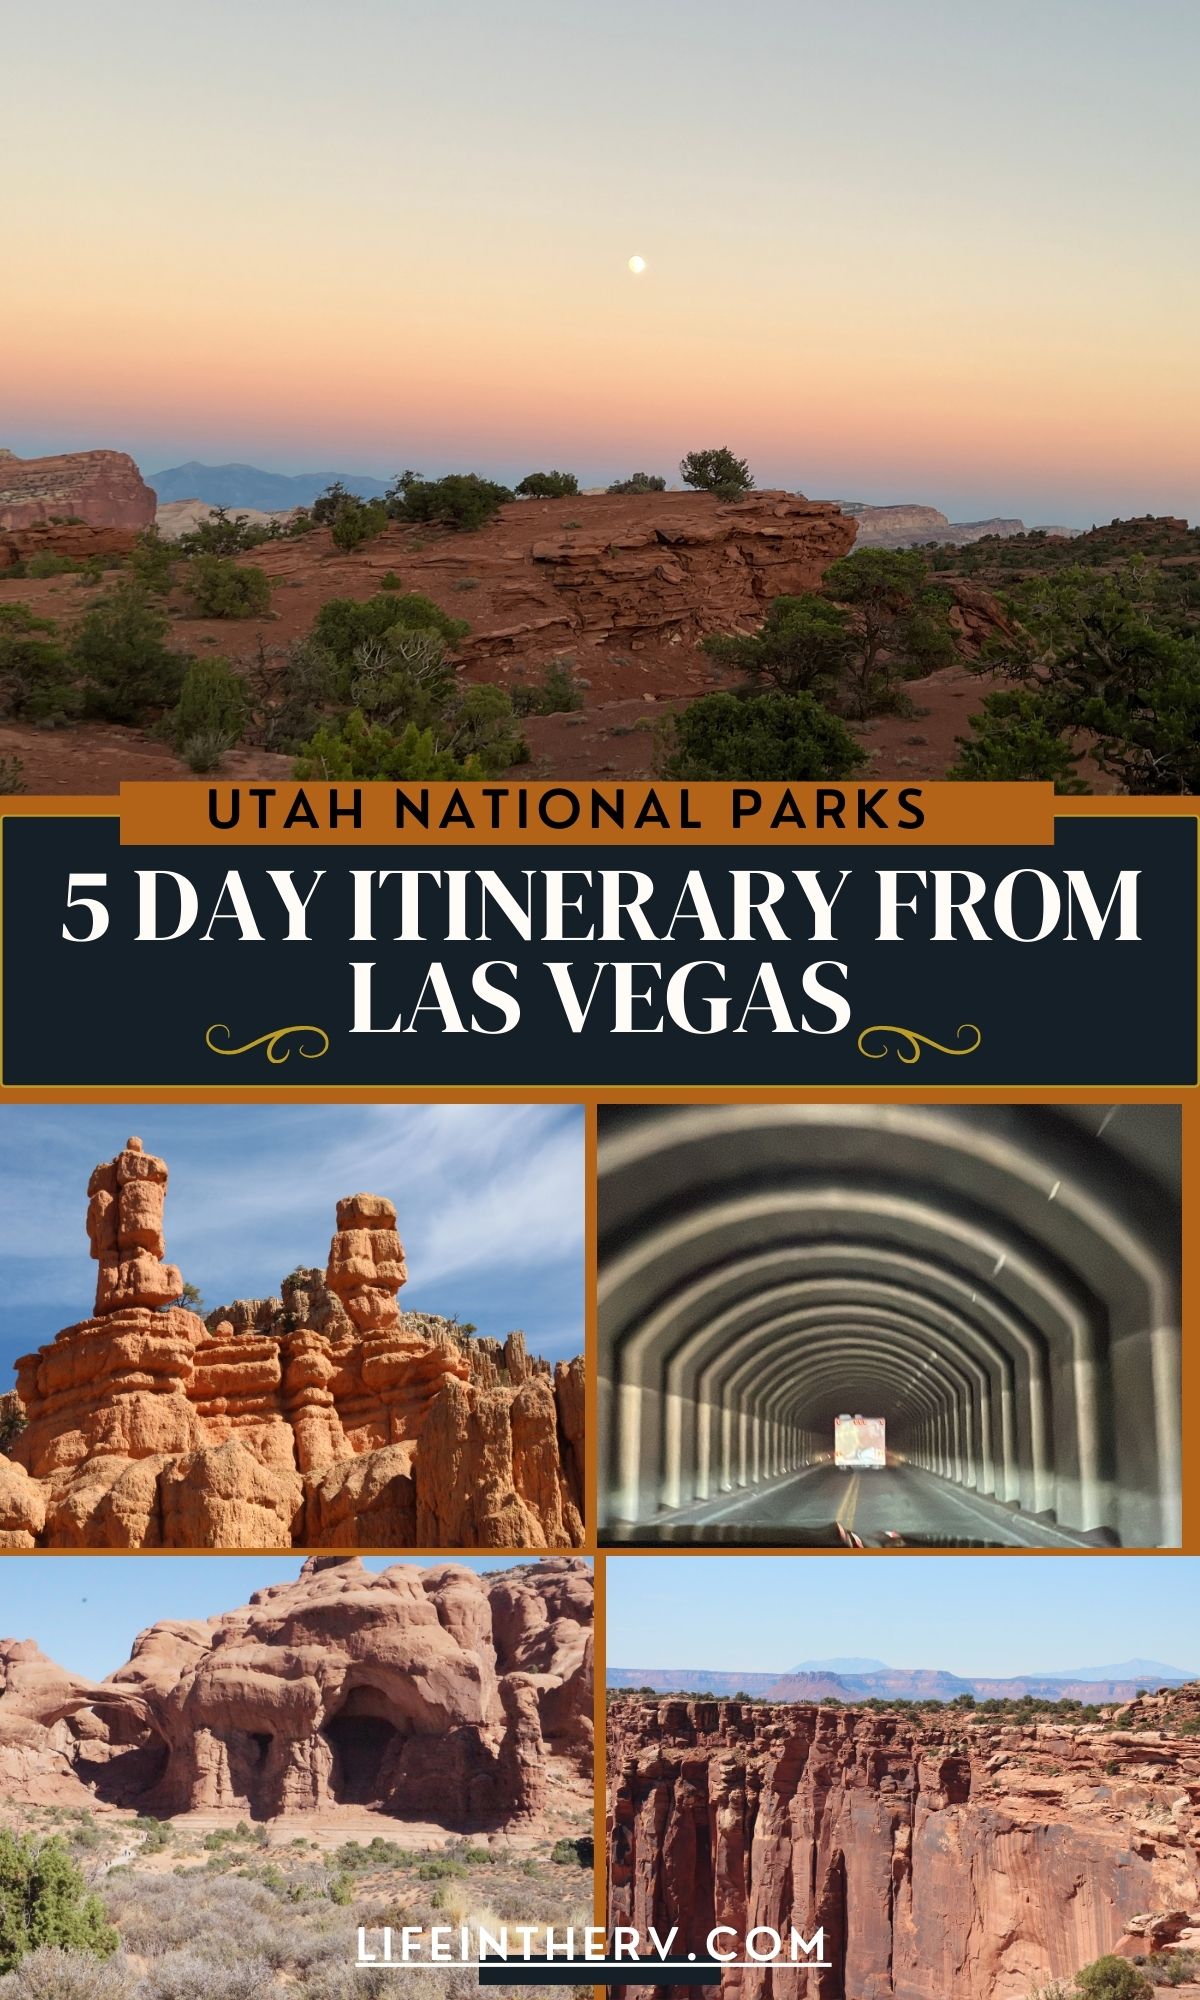 Utah National Parks 5-Day Itinerary from Las Vegas